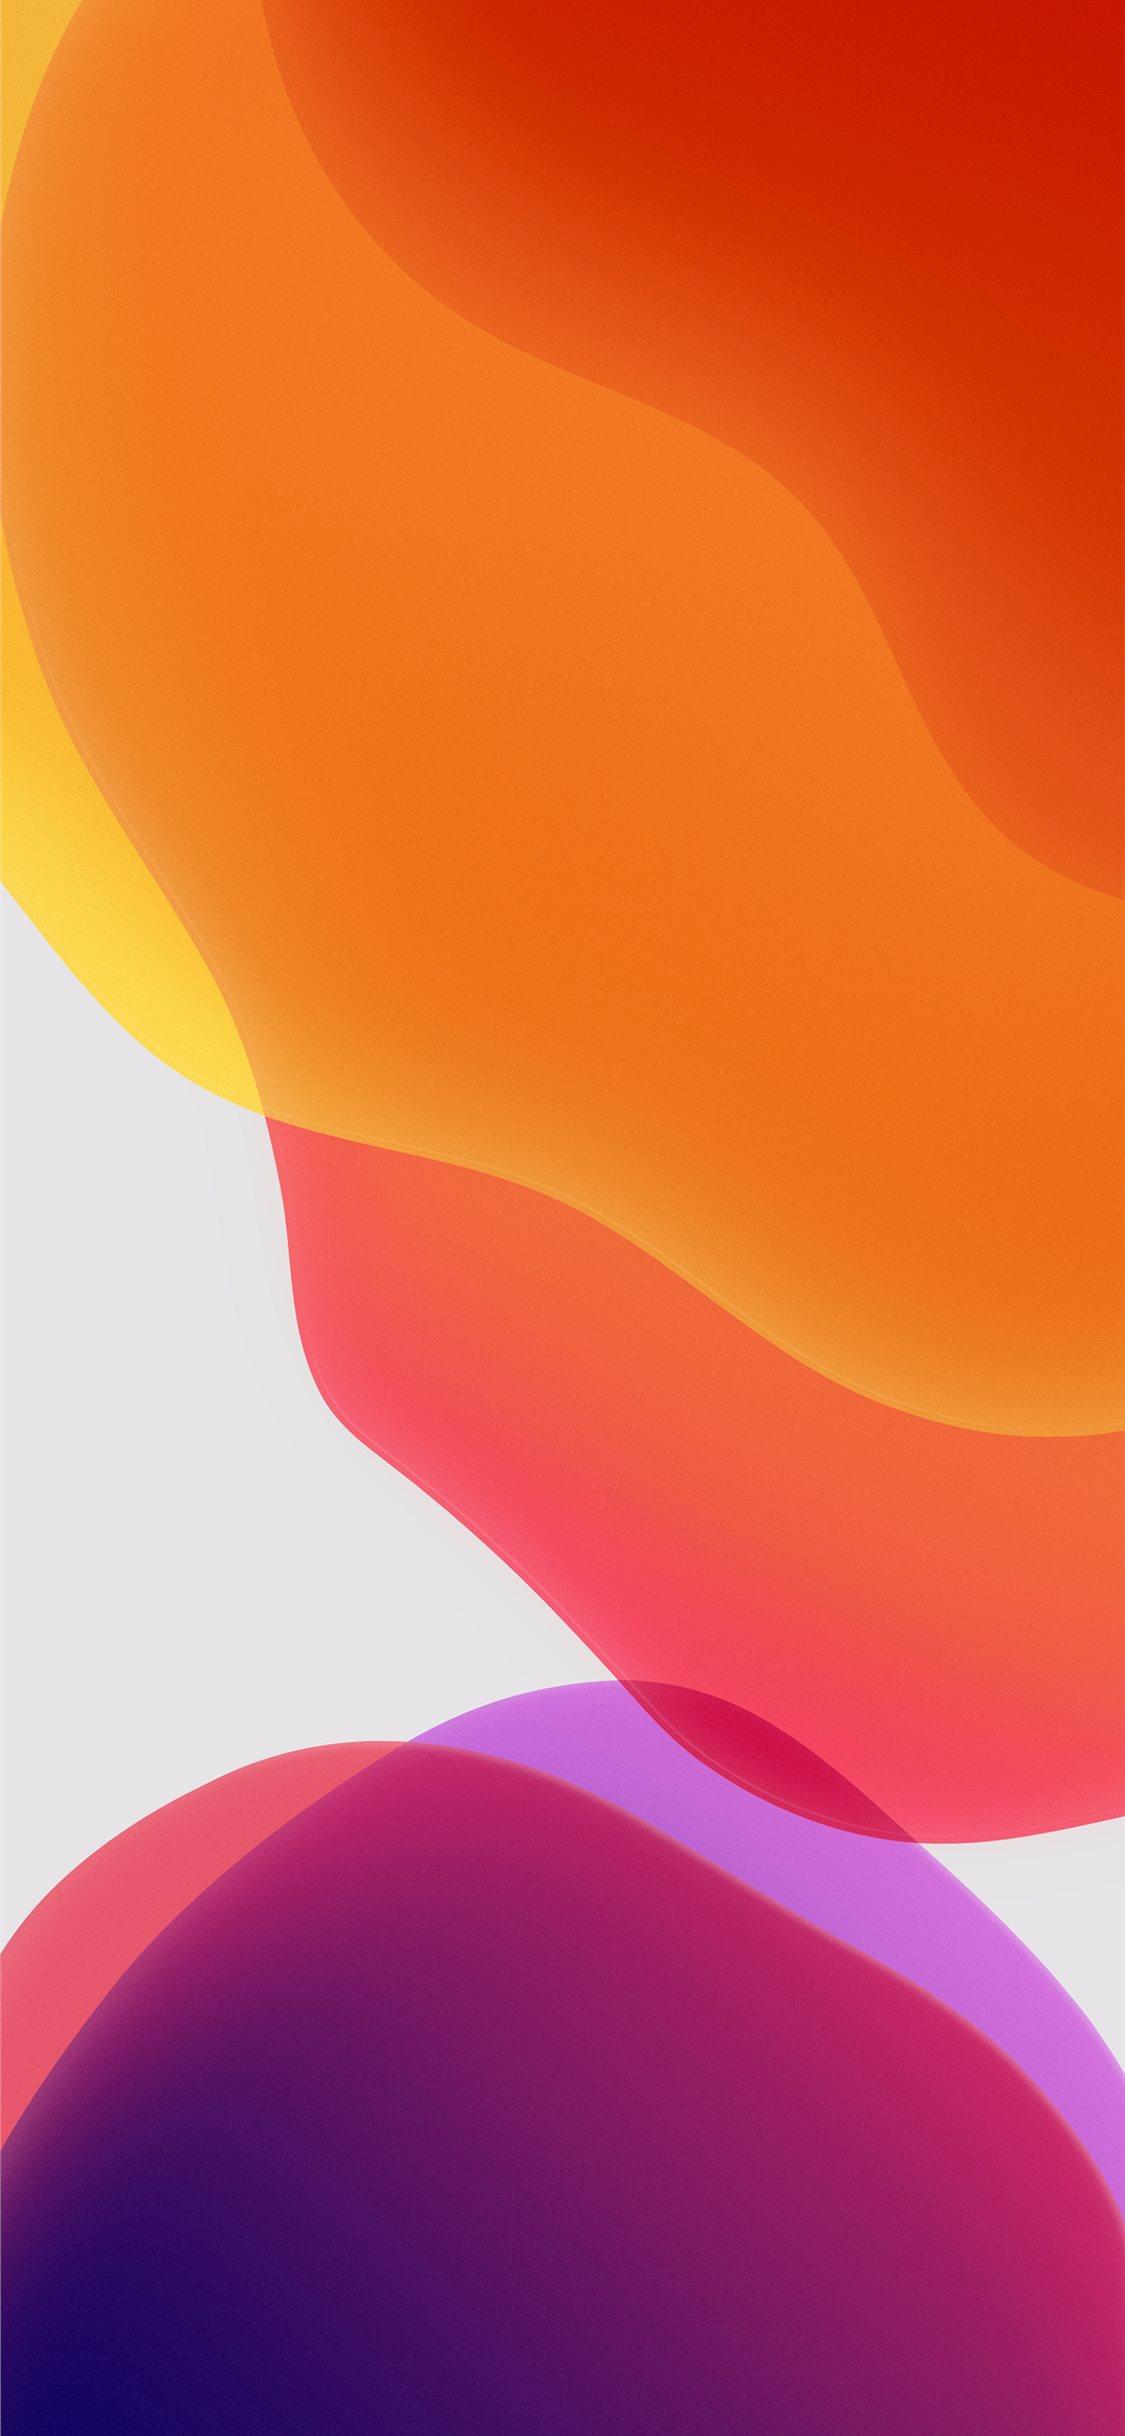 ios 13 iPhone X Wallpaper Free Download